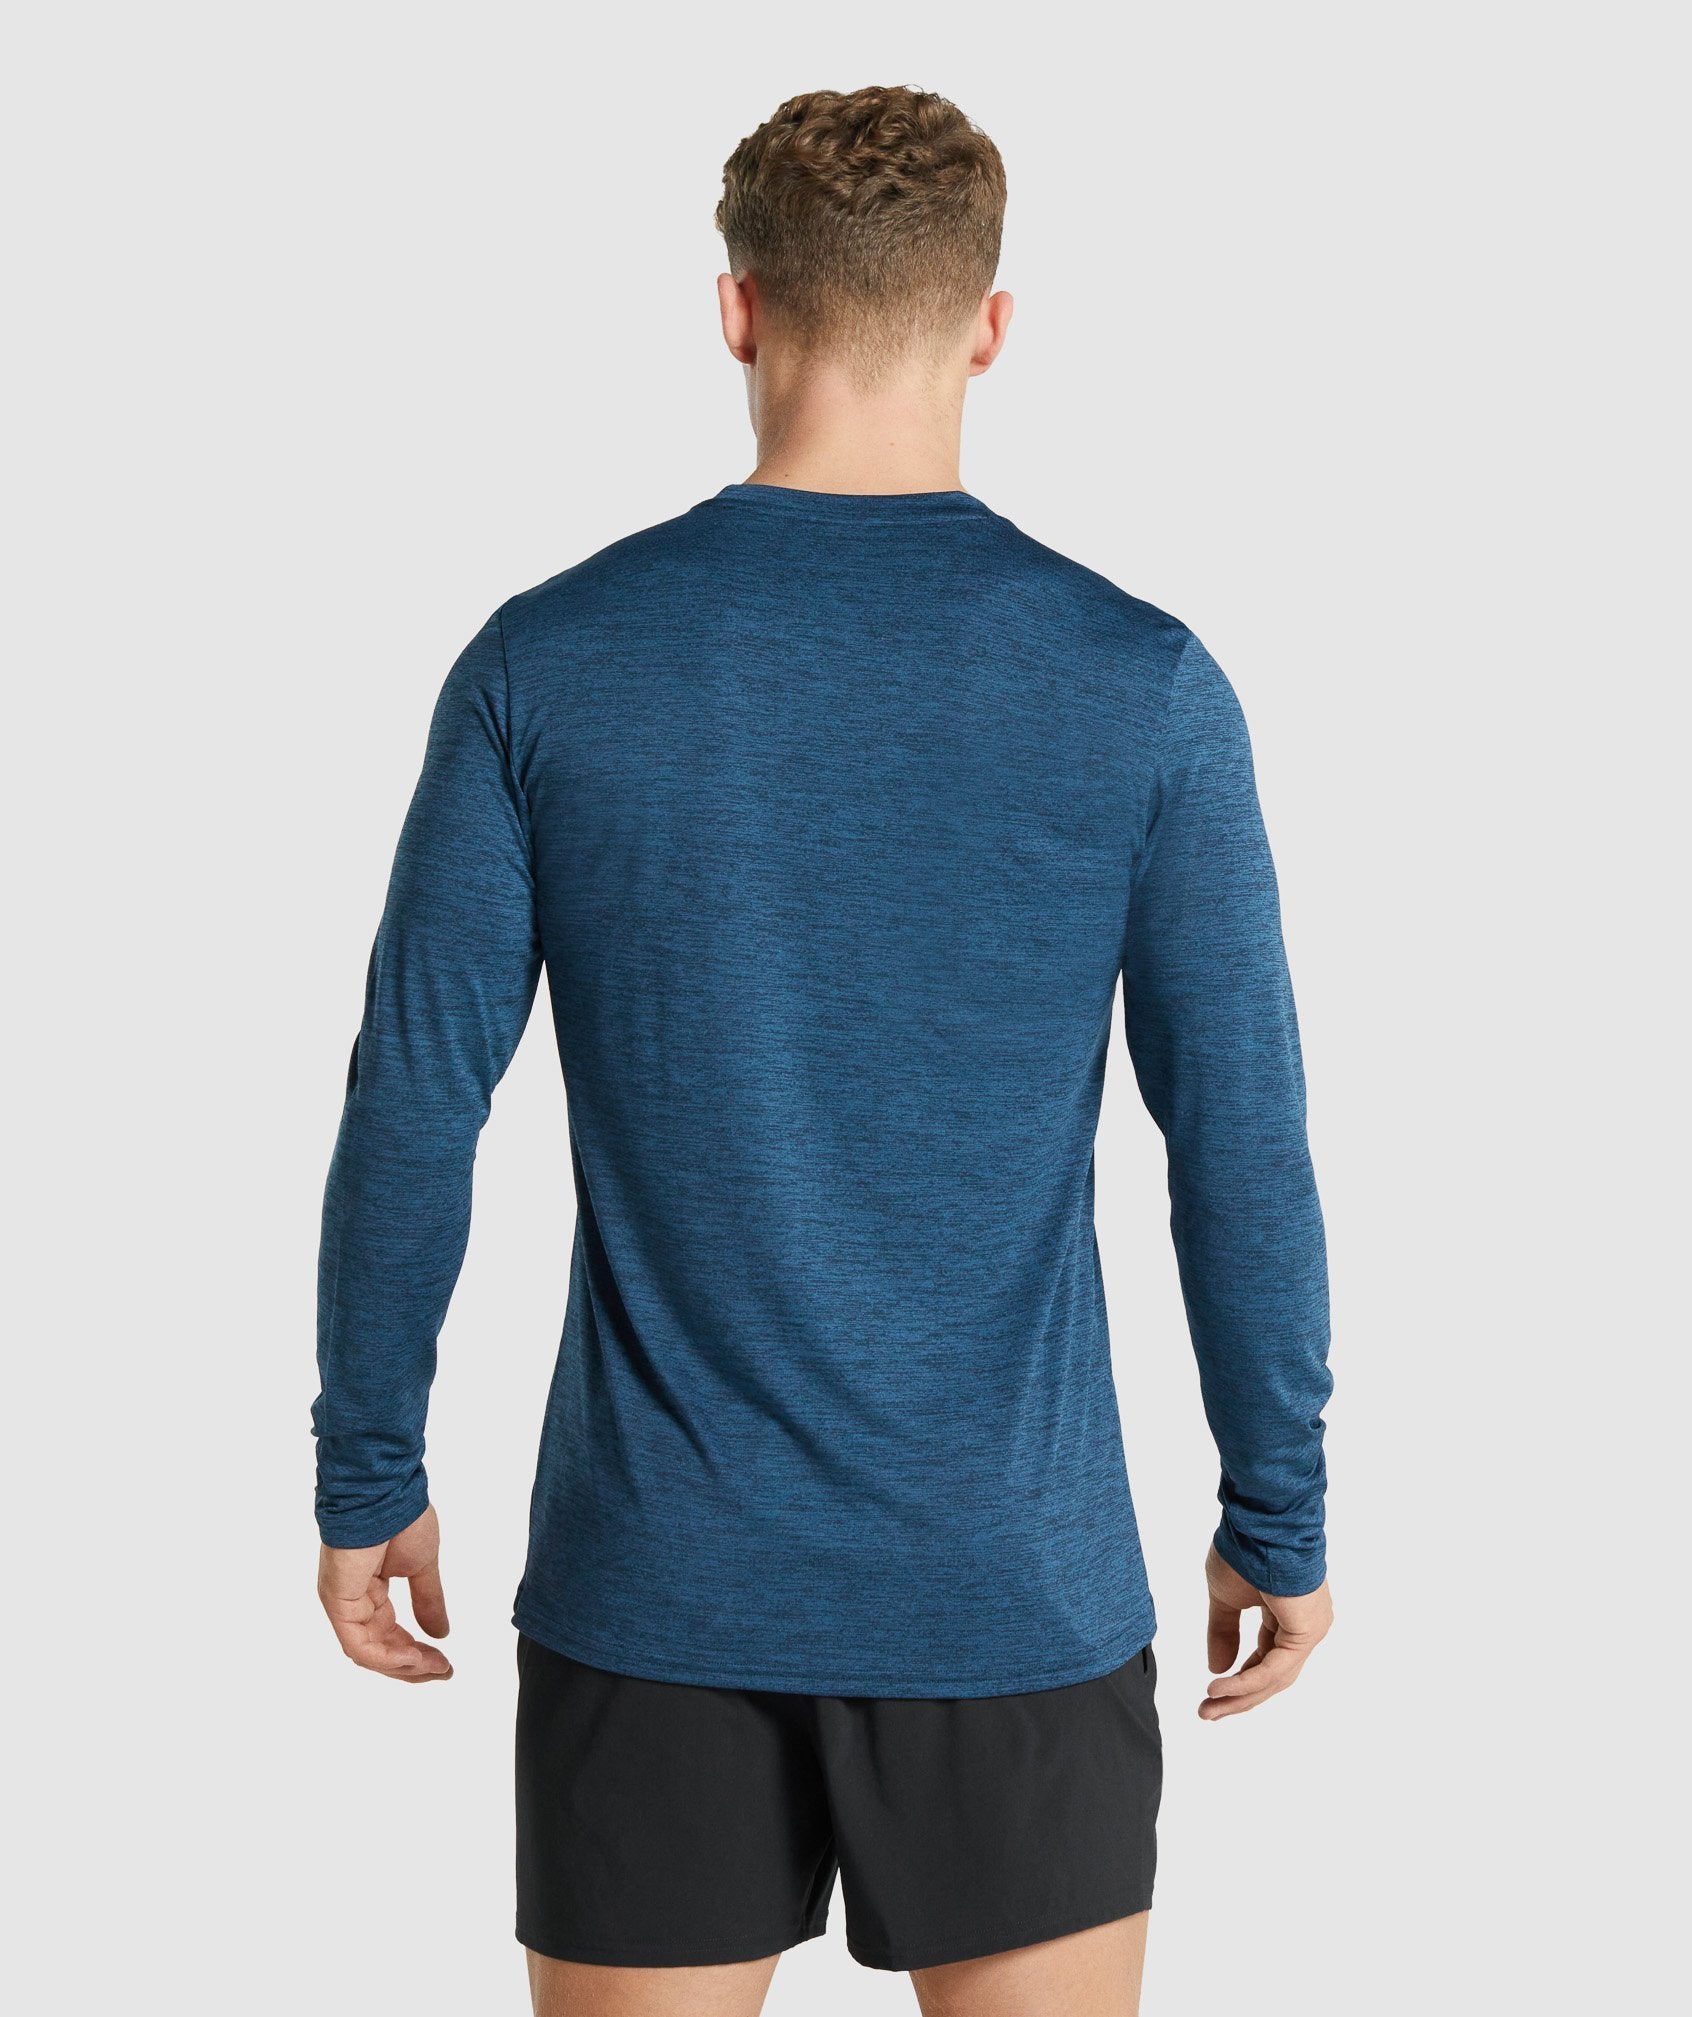 Arrival Marl Long Sleeve T-Shirt in Navy Marl - view 3